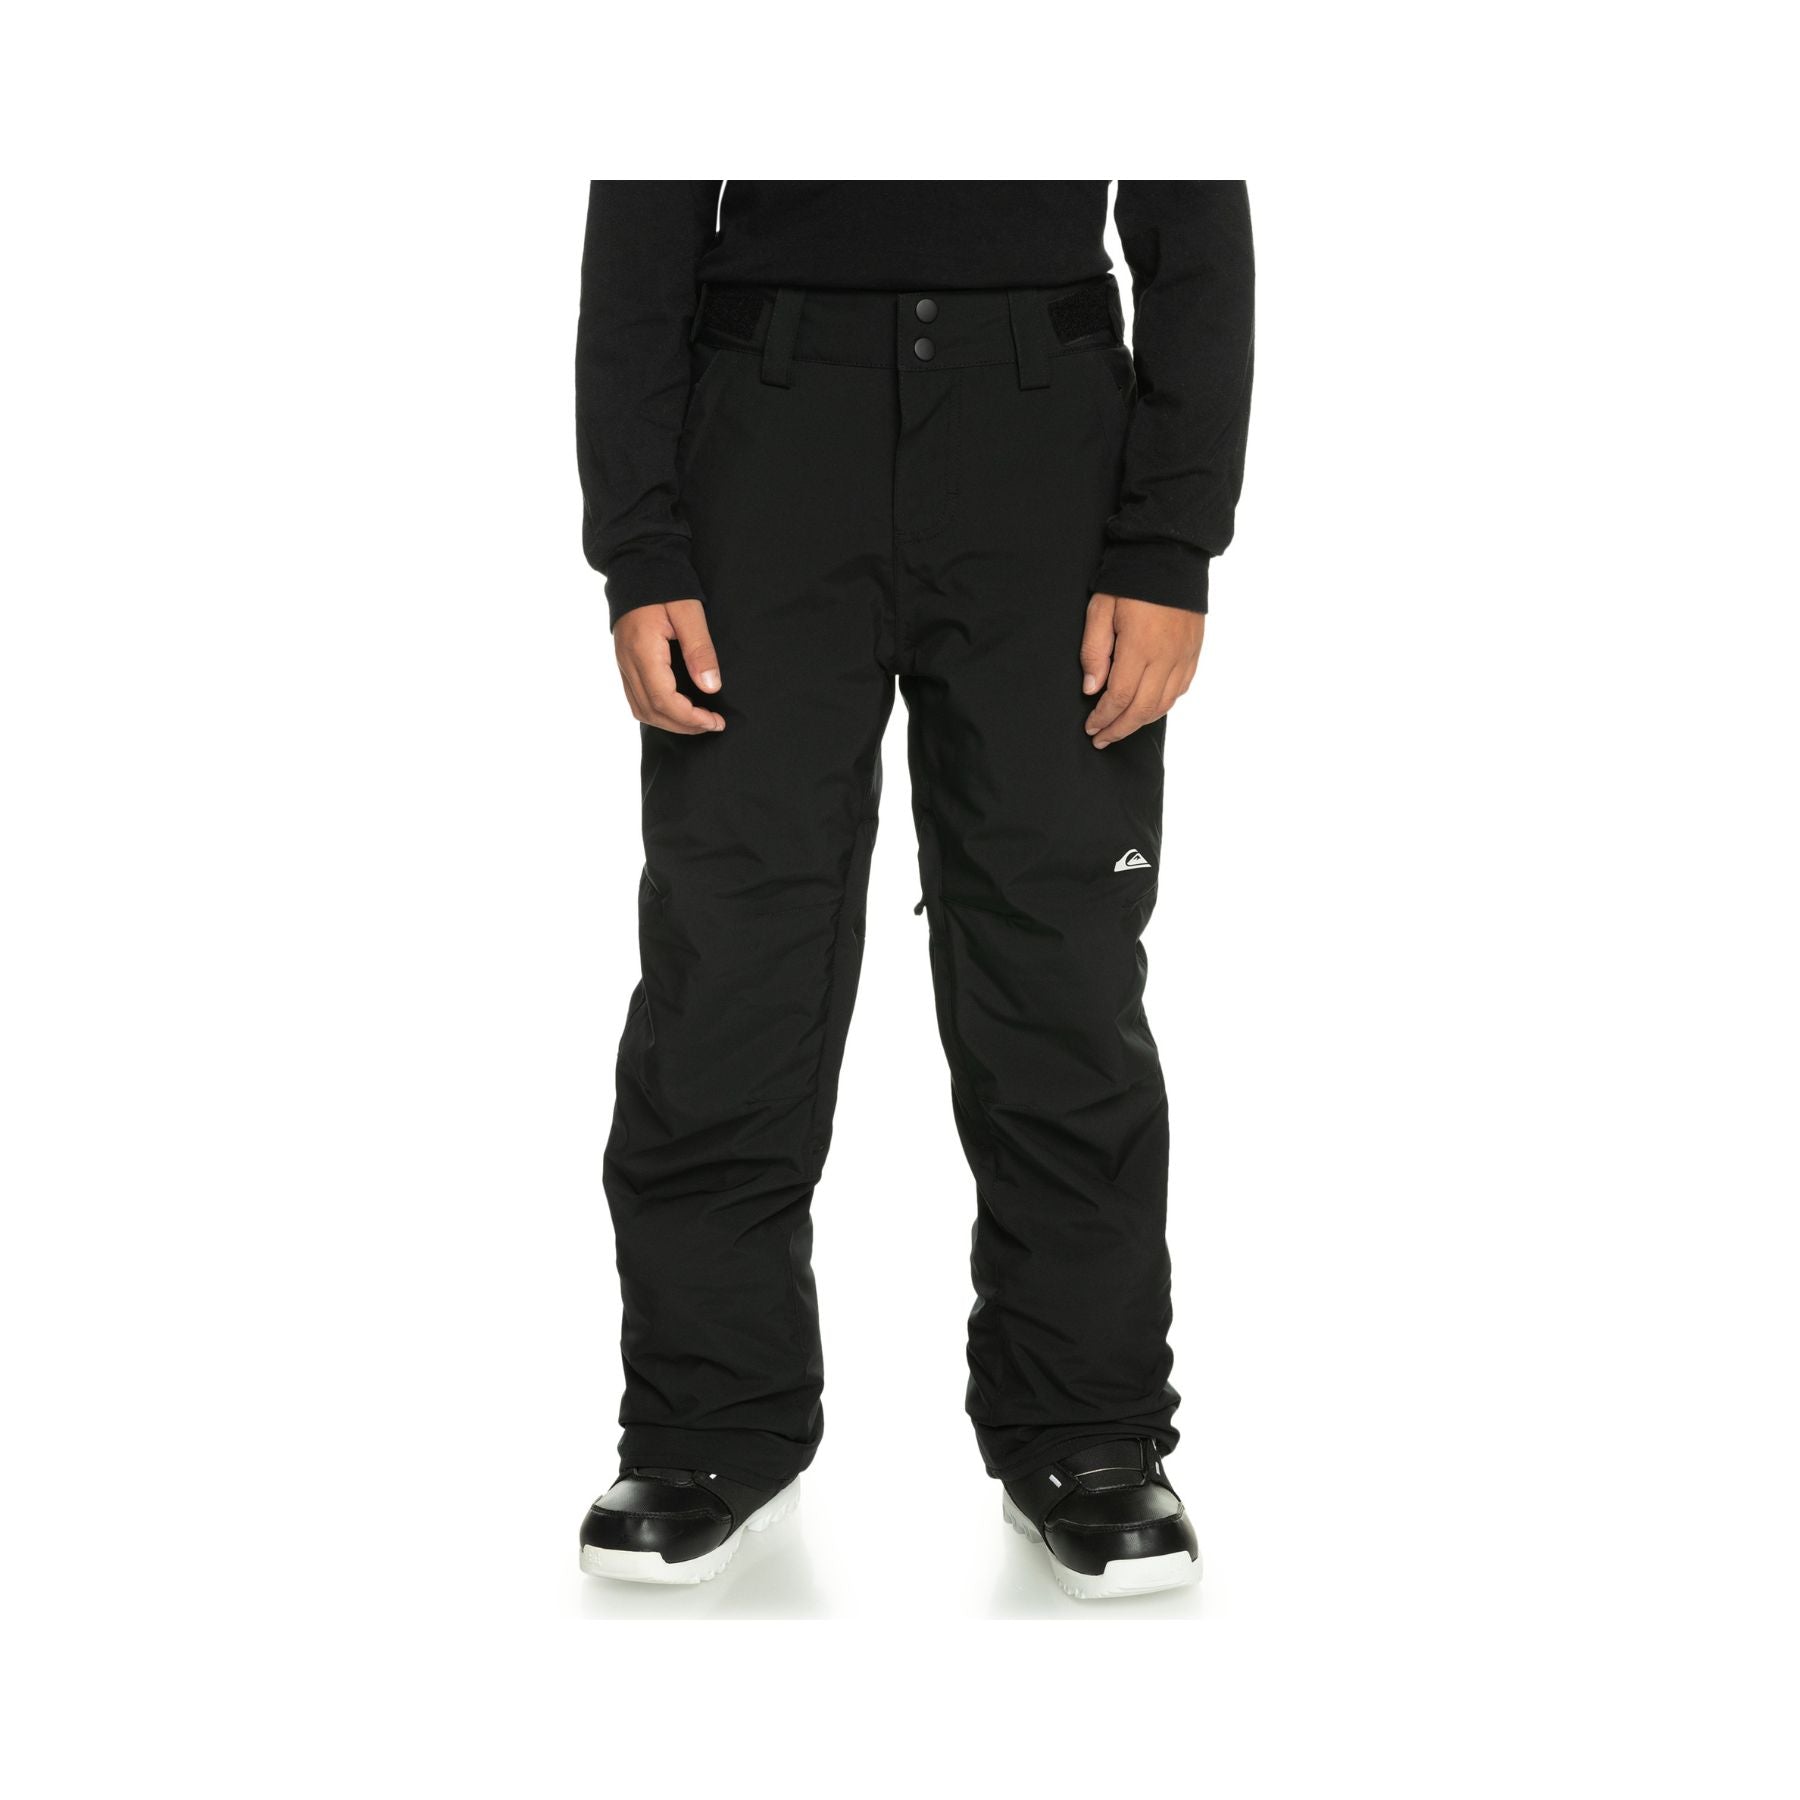 Quiksilver Estate Youth Pant in True Black